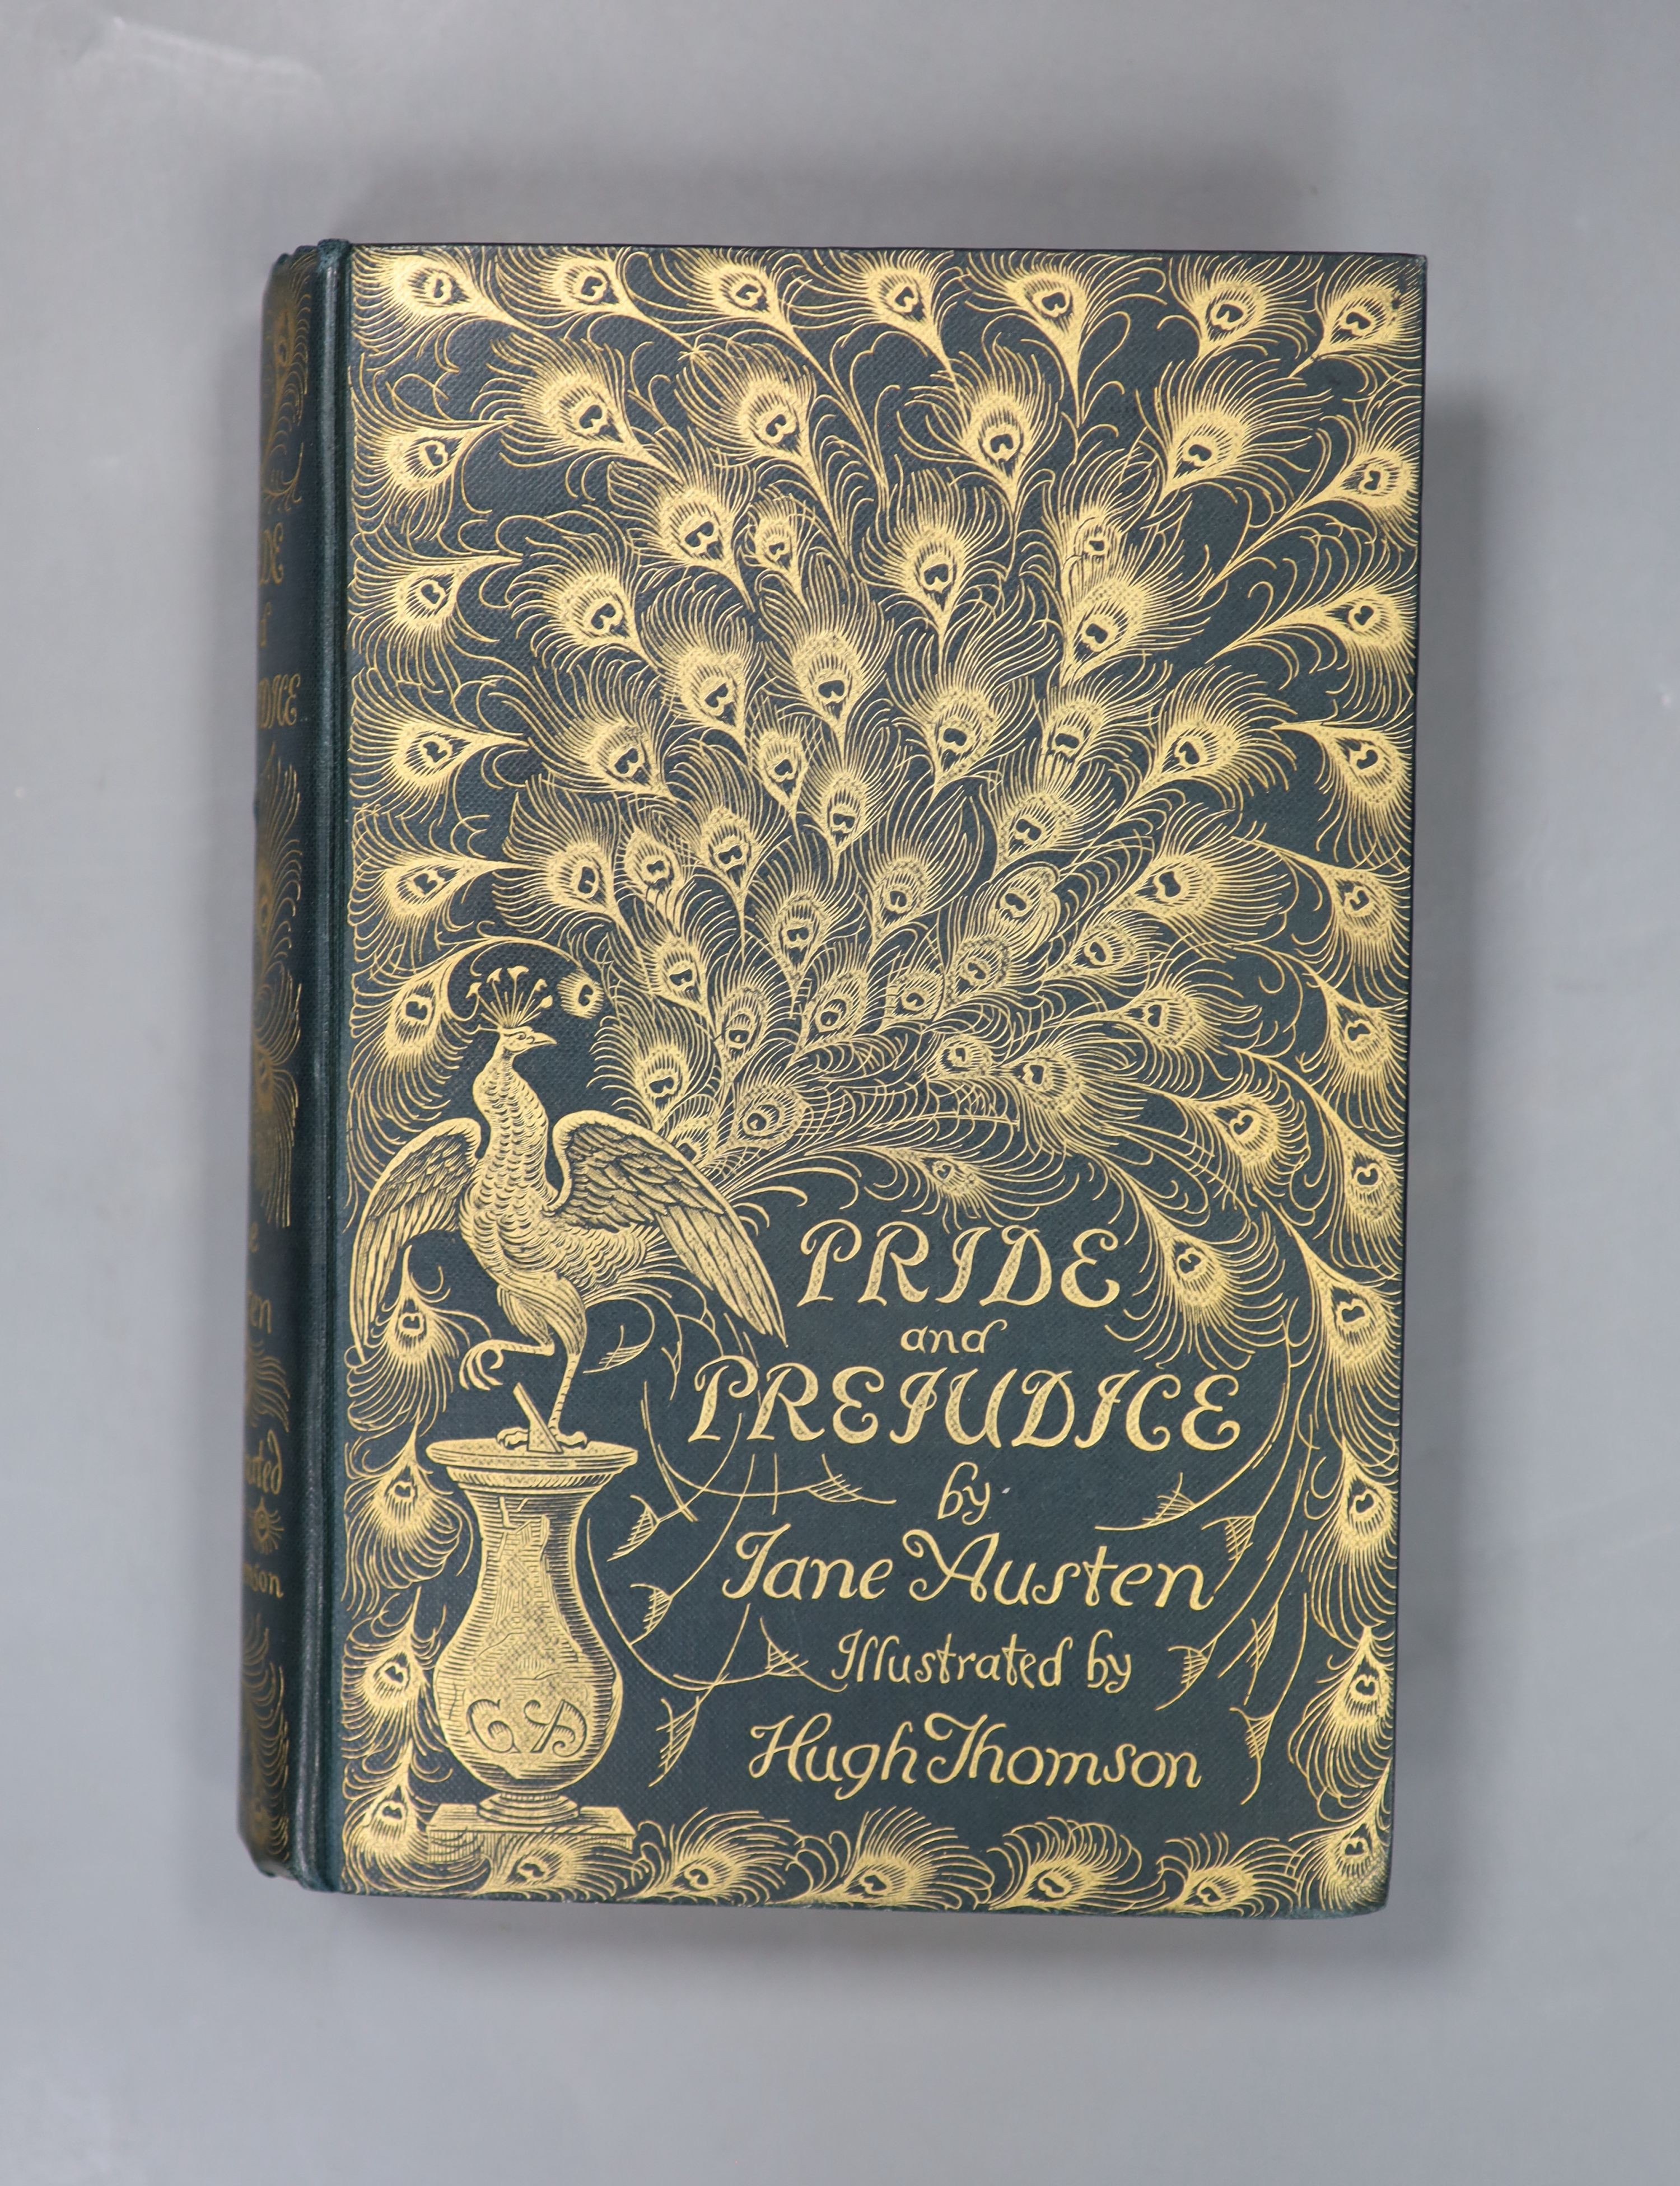 Austen, Jane - Pride and Prejudice, illustrated by Hugh Thomson, original gilt decorated cloth, first ‘’Peacock’’ edition, bookplate with presentation inscription pasted to front inner board, fly leaves spotted, text and